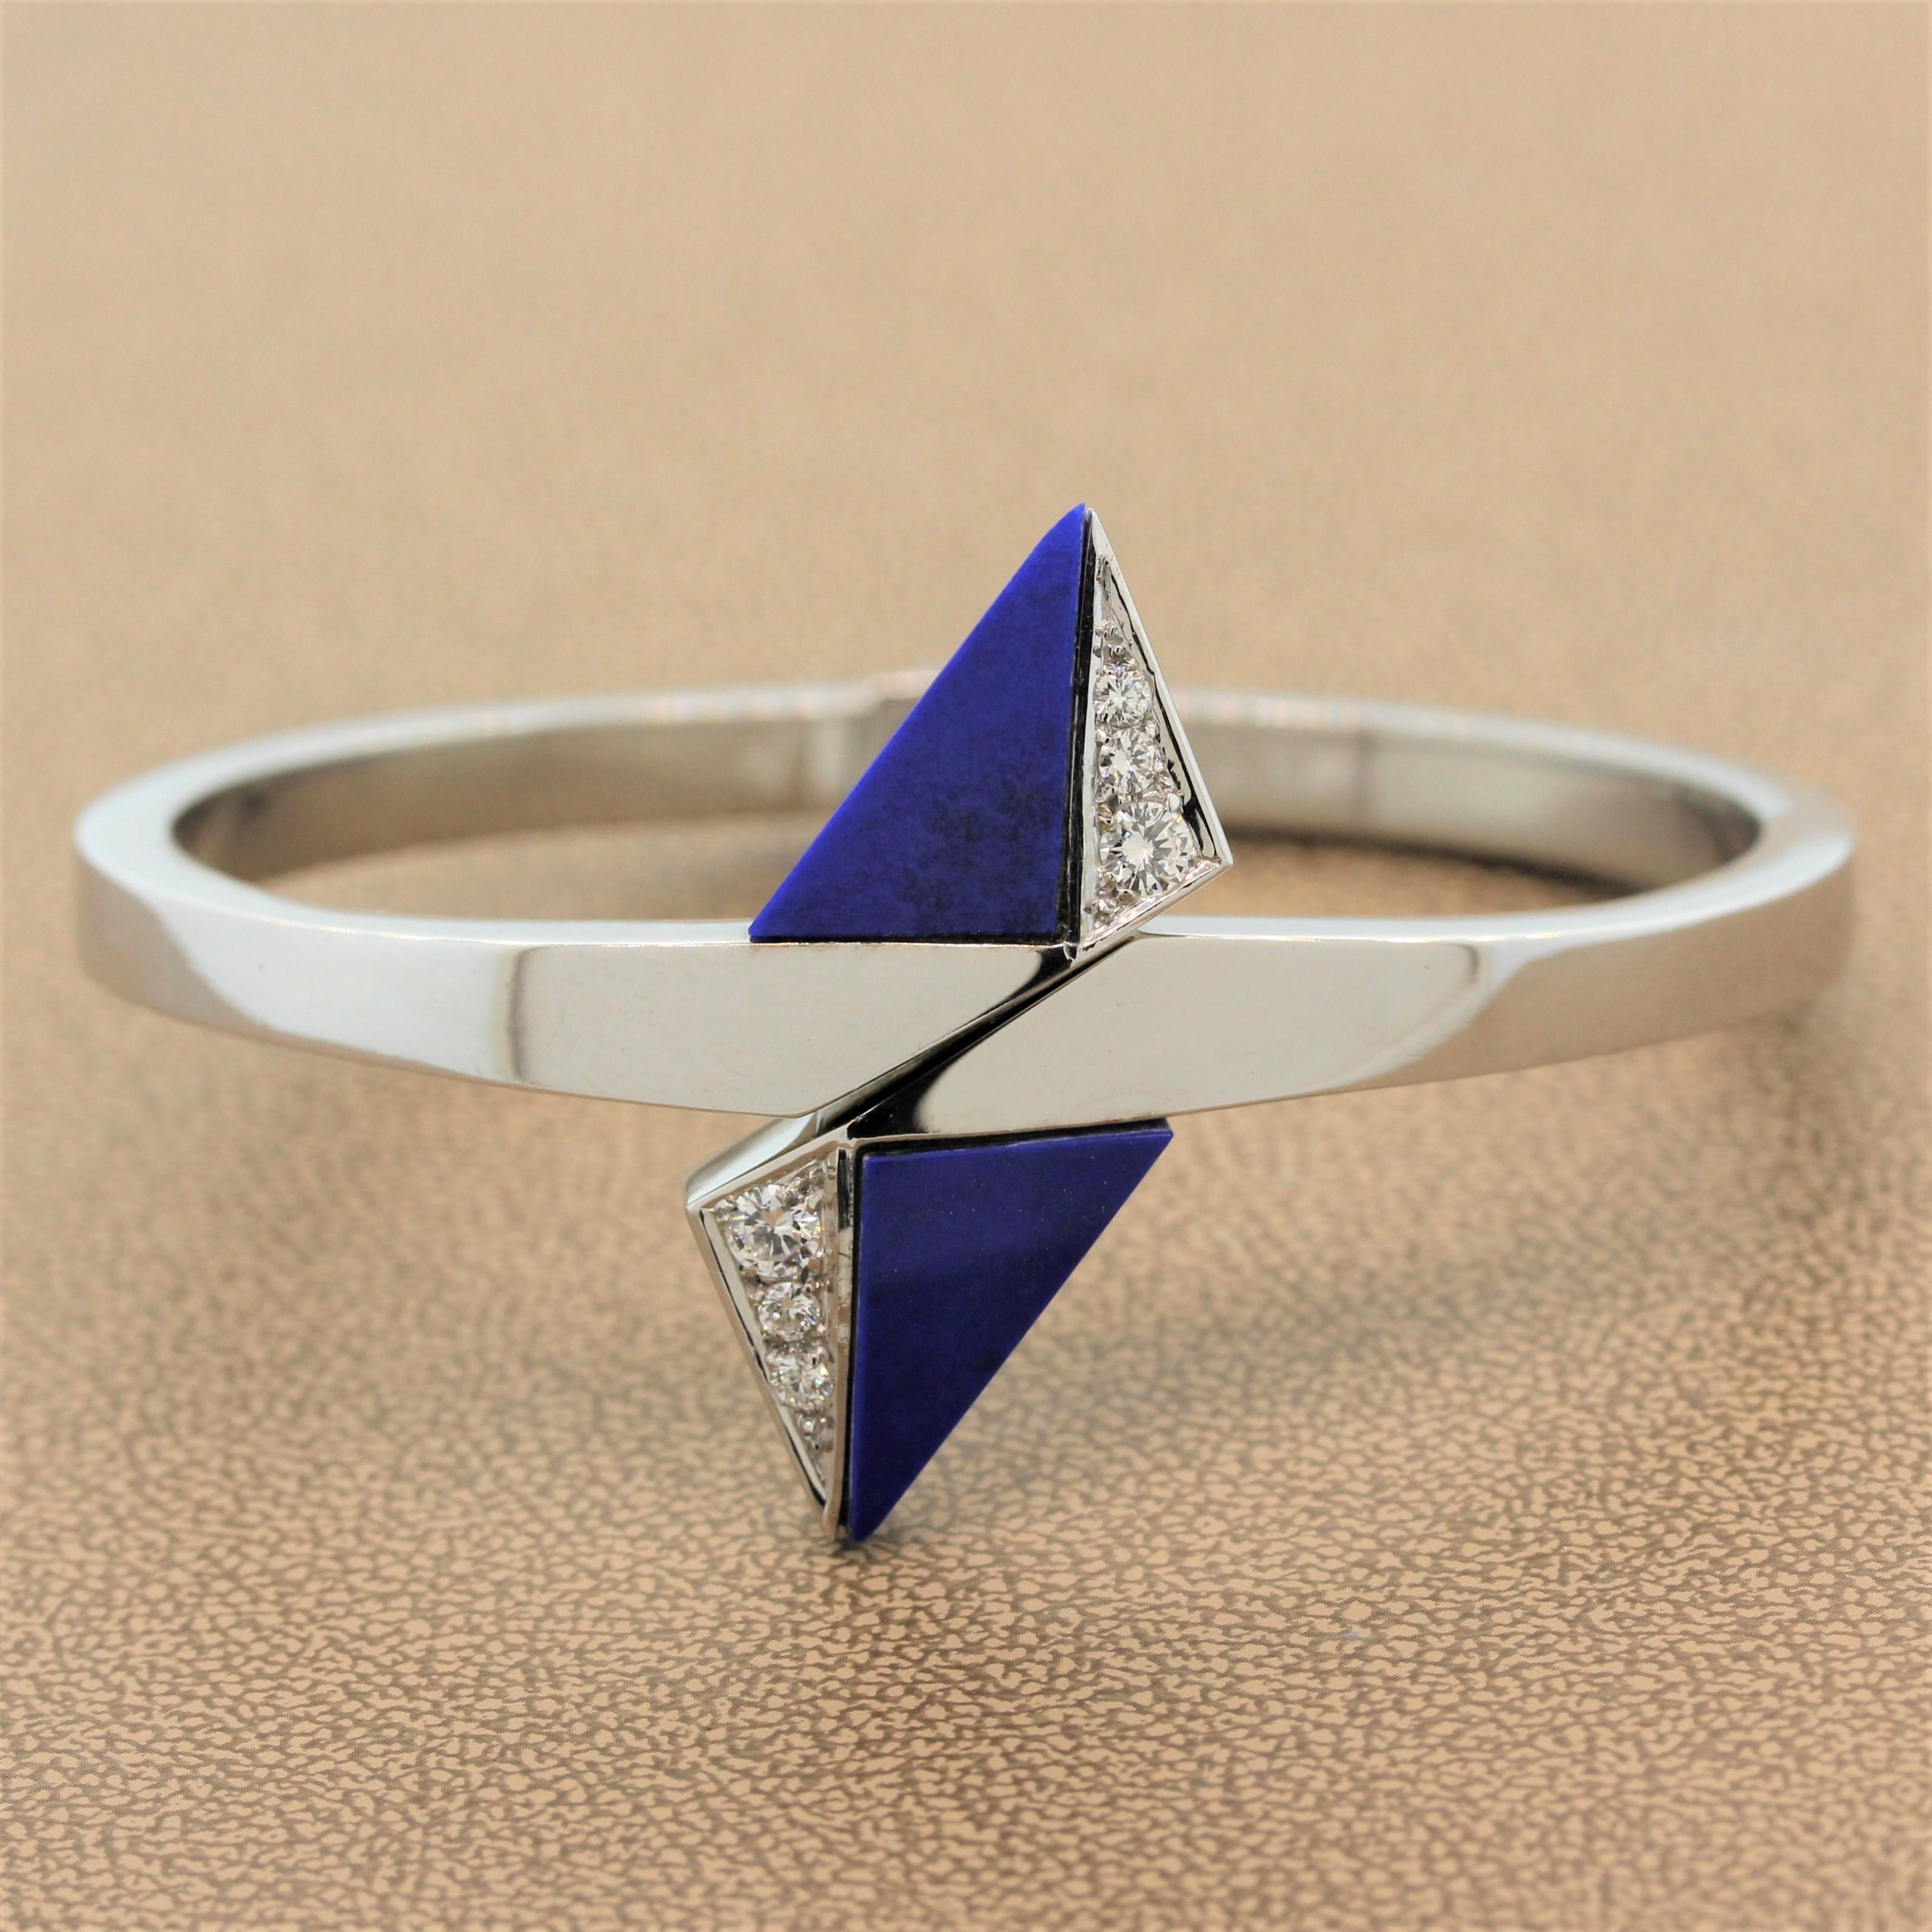 A perfectly geometrical cuff featuring trillion cut lapis lazuli beside approximately 0.25 carats of round cut diamonds in a triangular 18K white gold setting. The solid cuff opens with a simple stretch of the two sides.

Cuff Size: 6.50 inches
